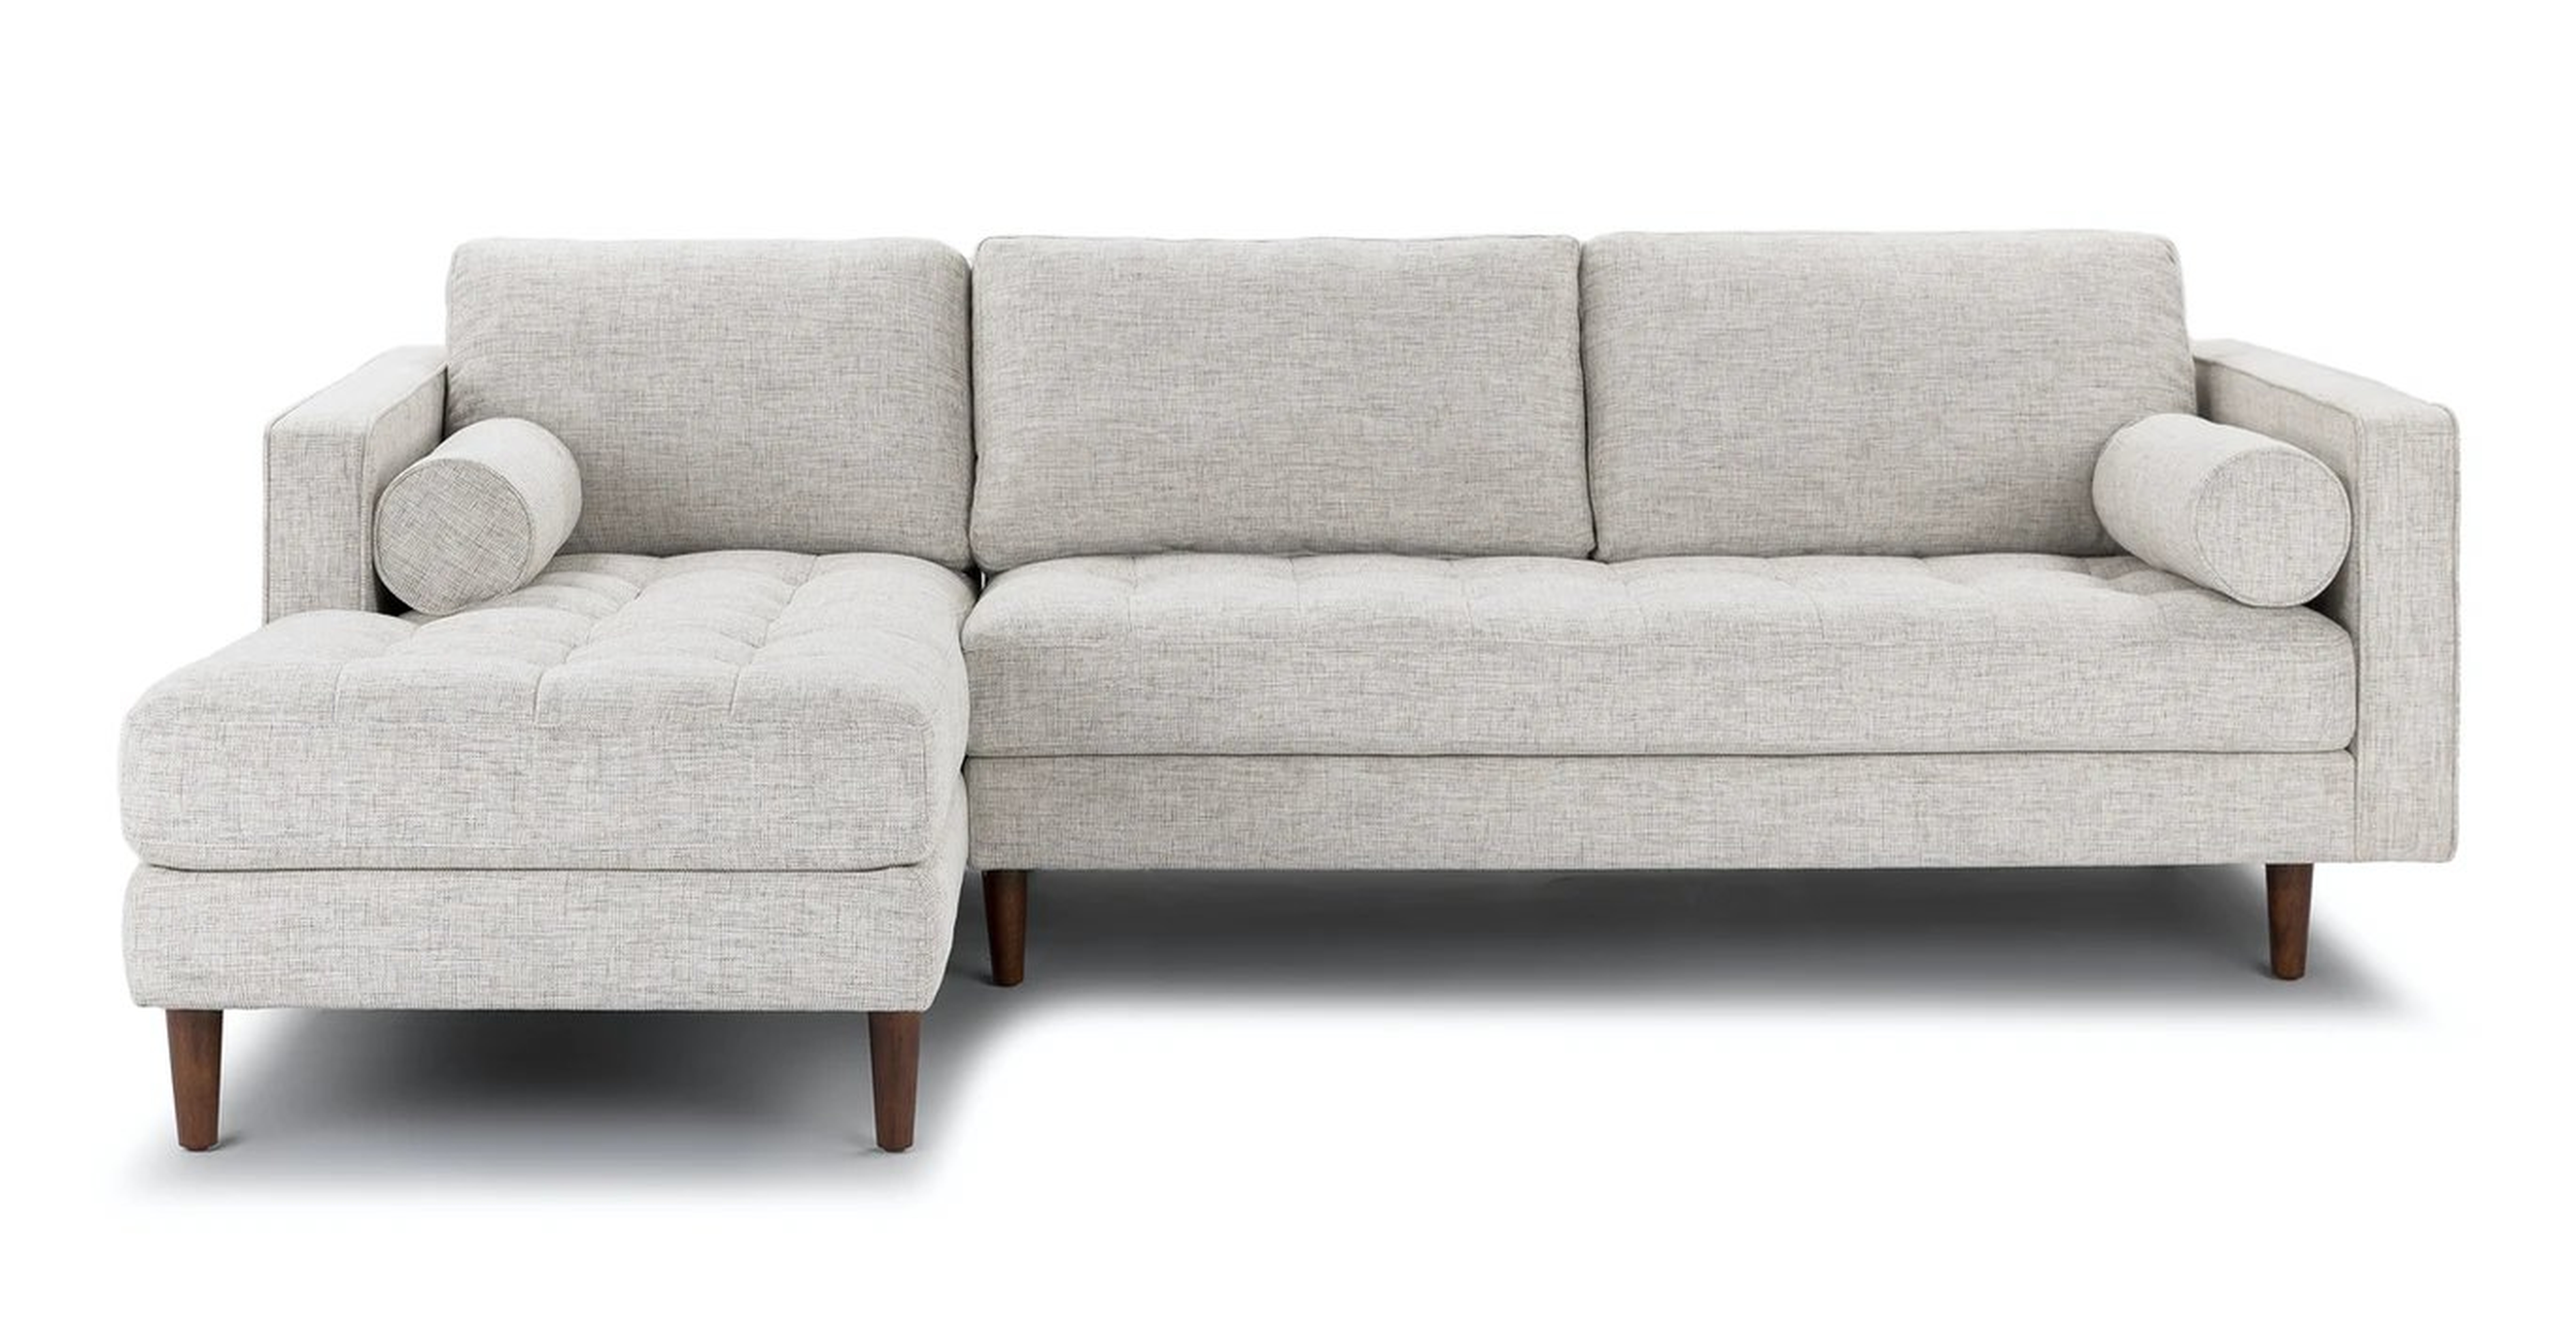 Sven Left Sectional Sofa, Birch Ivory - Article